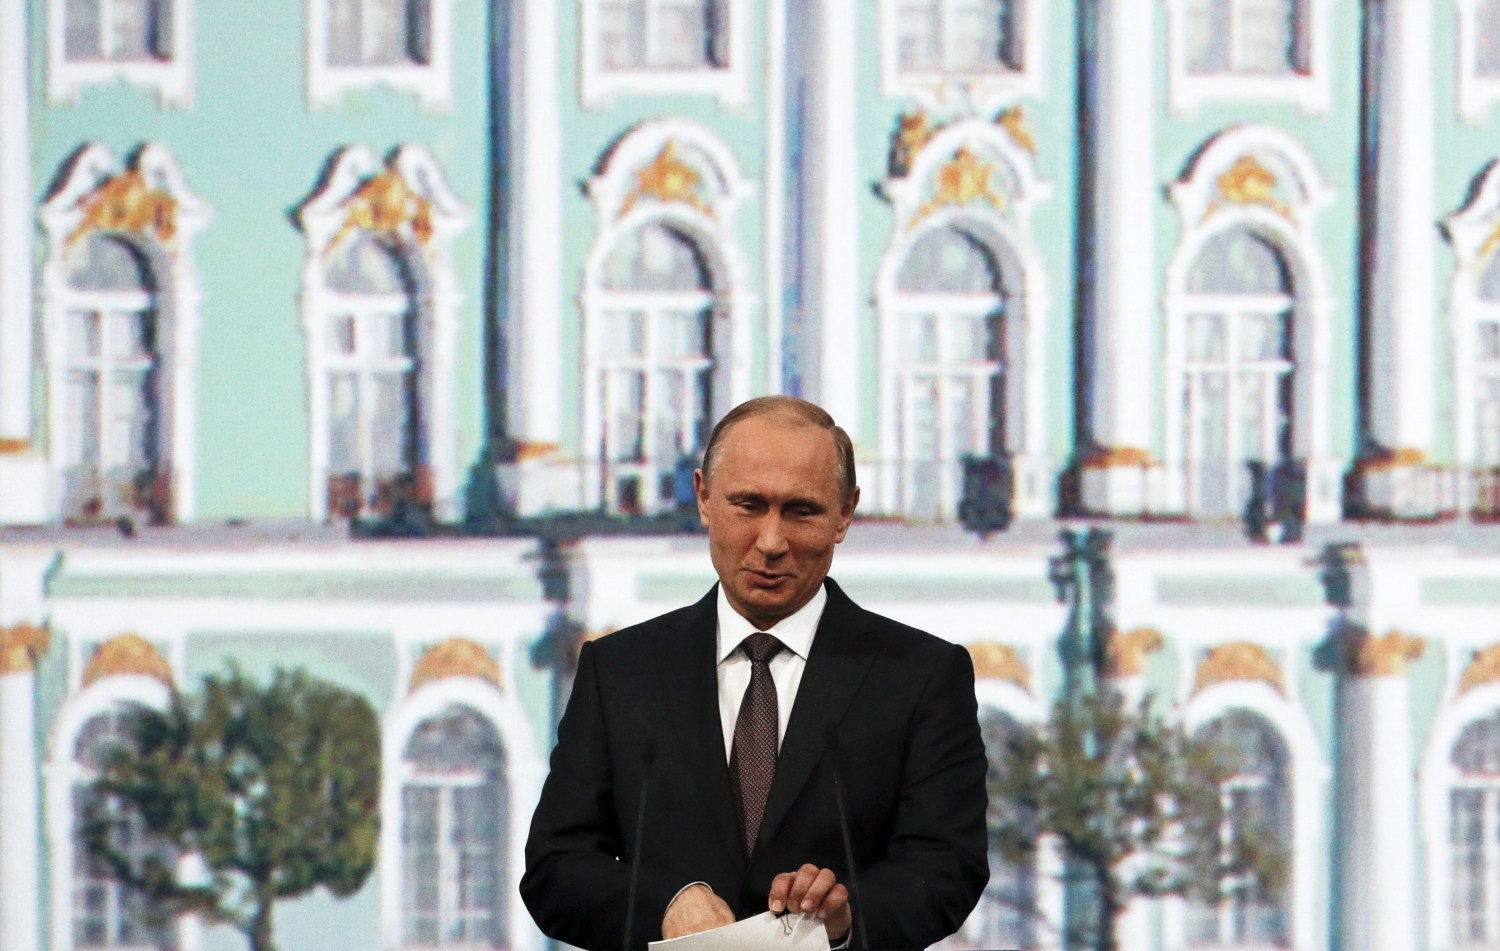 Russian President Vladimir Putin speaks during a session of the St. Petersburg International Economic Forum 2015 (SPIEF 2015) in St. Petersburg, Russia, June 19, 2015. Putin said on Friday Russia was doing well in tackling its economic crisis, aggravated by Western sanctions over the Ukraine crisis and a fall in global oil prices. REUTERS/Grigory Dukor - GF10000133125